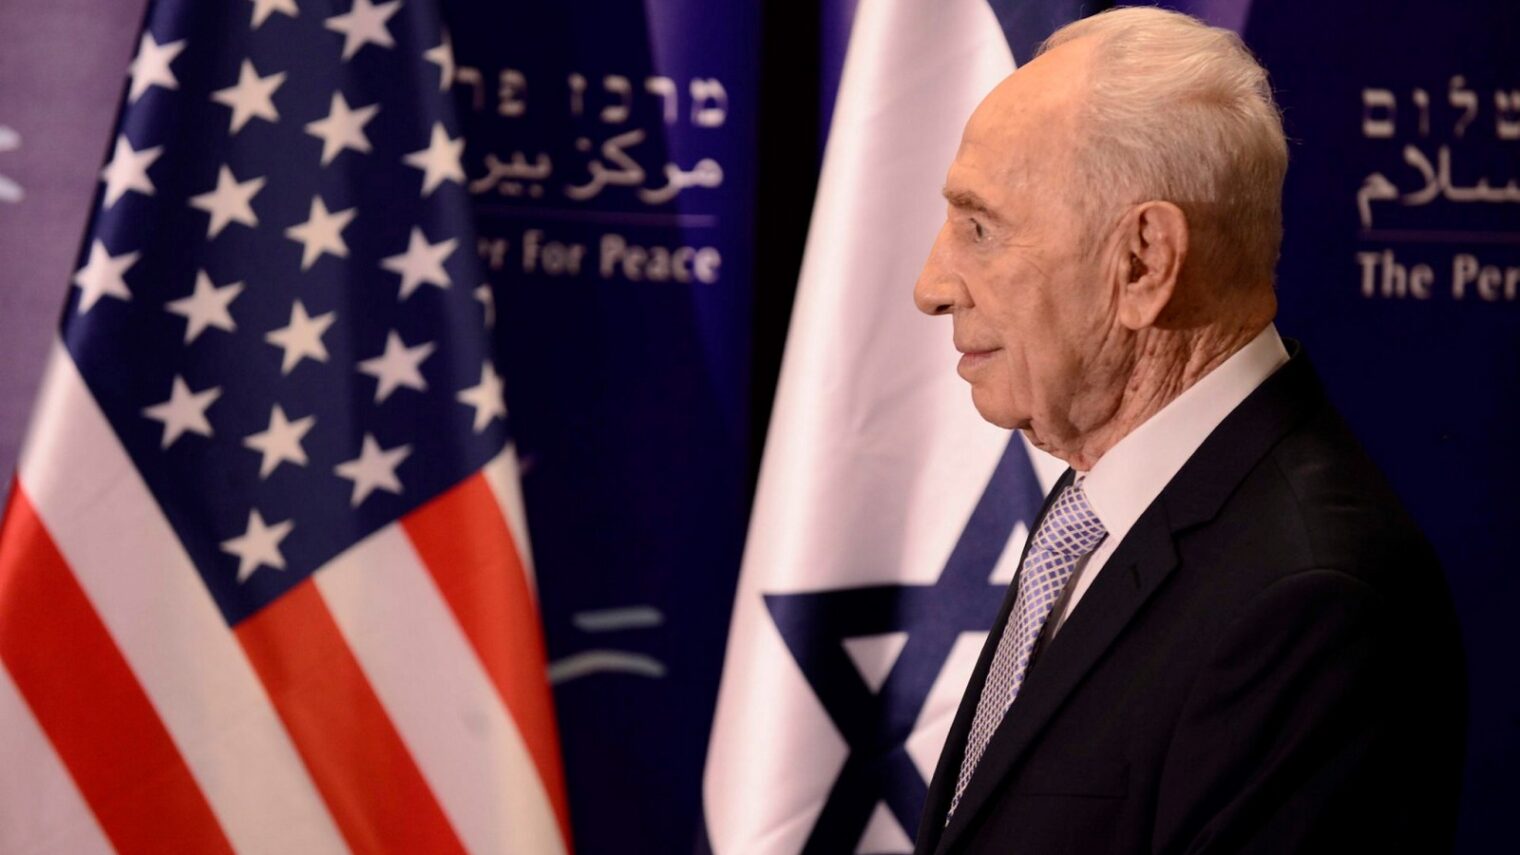 'No one did more over so many years as Shimon Peres to build the alliance between our two countries,' President Barack Obama speaking in the wake of the death of Shimon Peres. Photo by Olivier Fitoussi /FLASH90